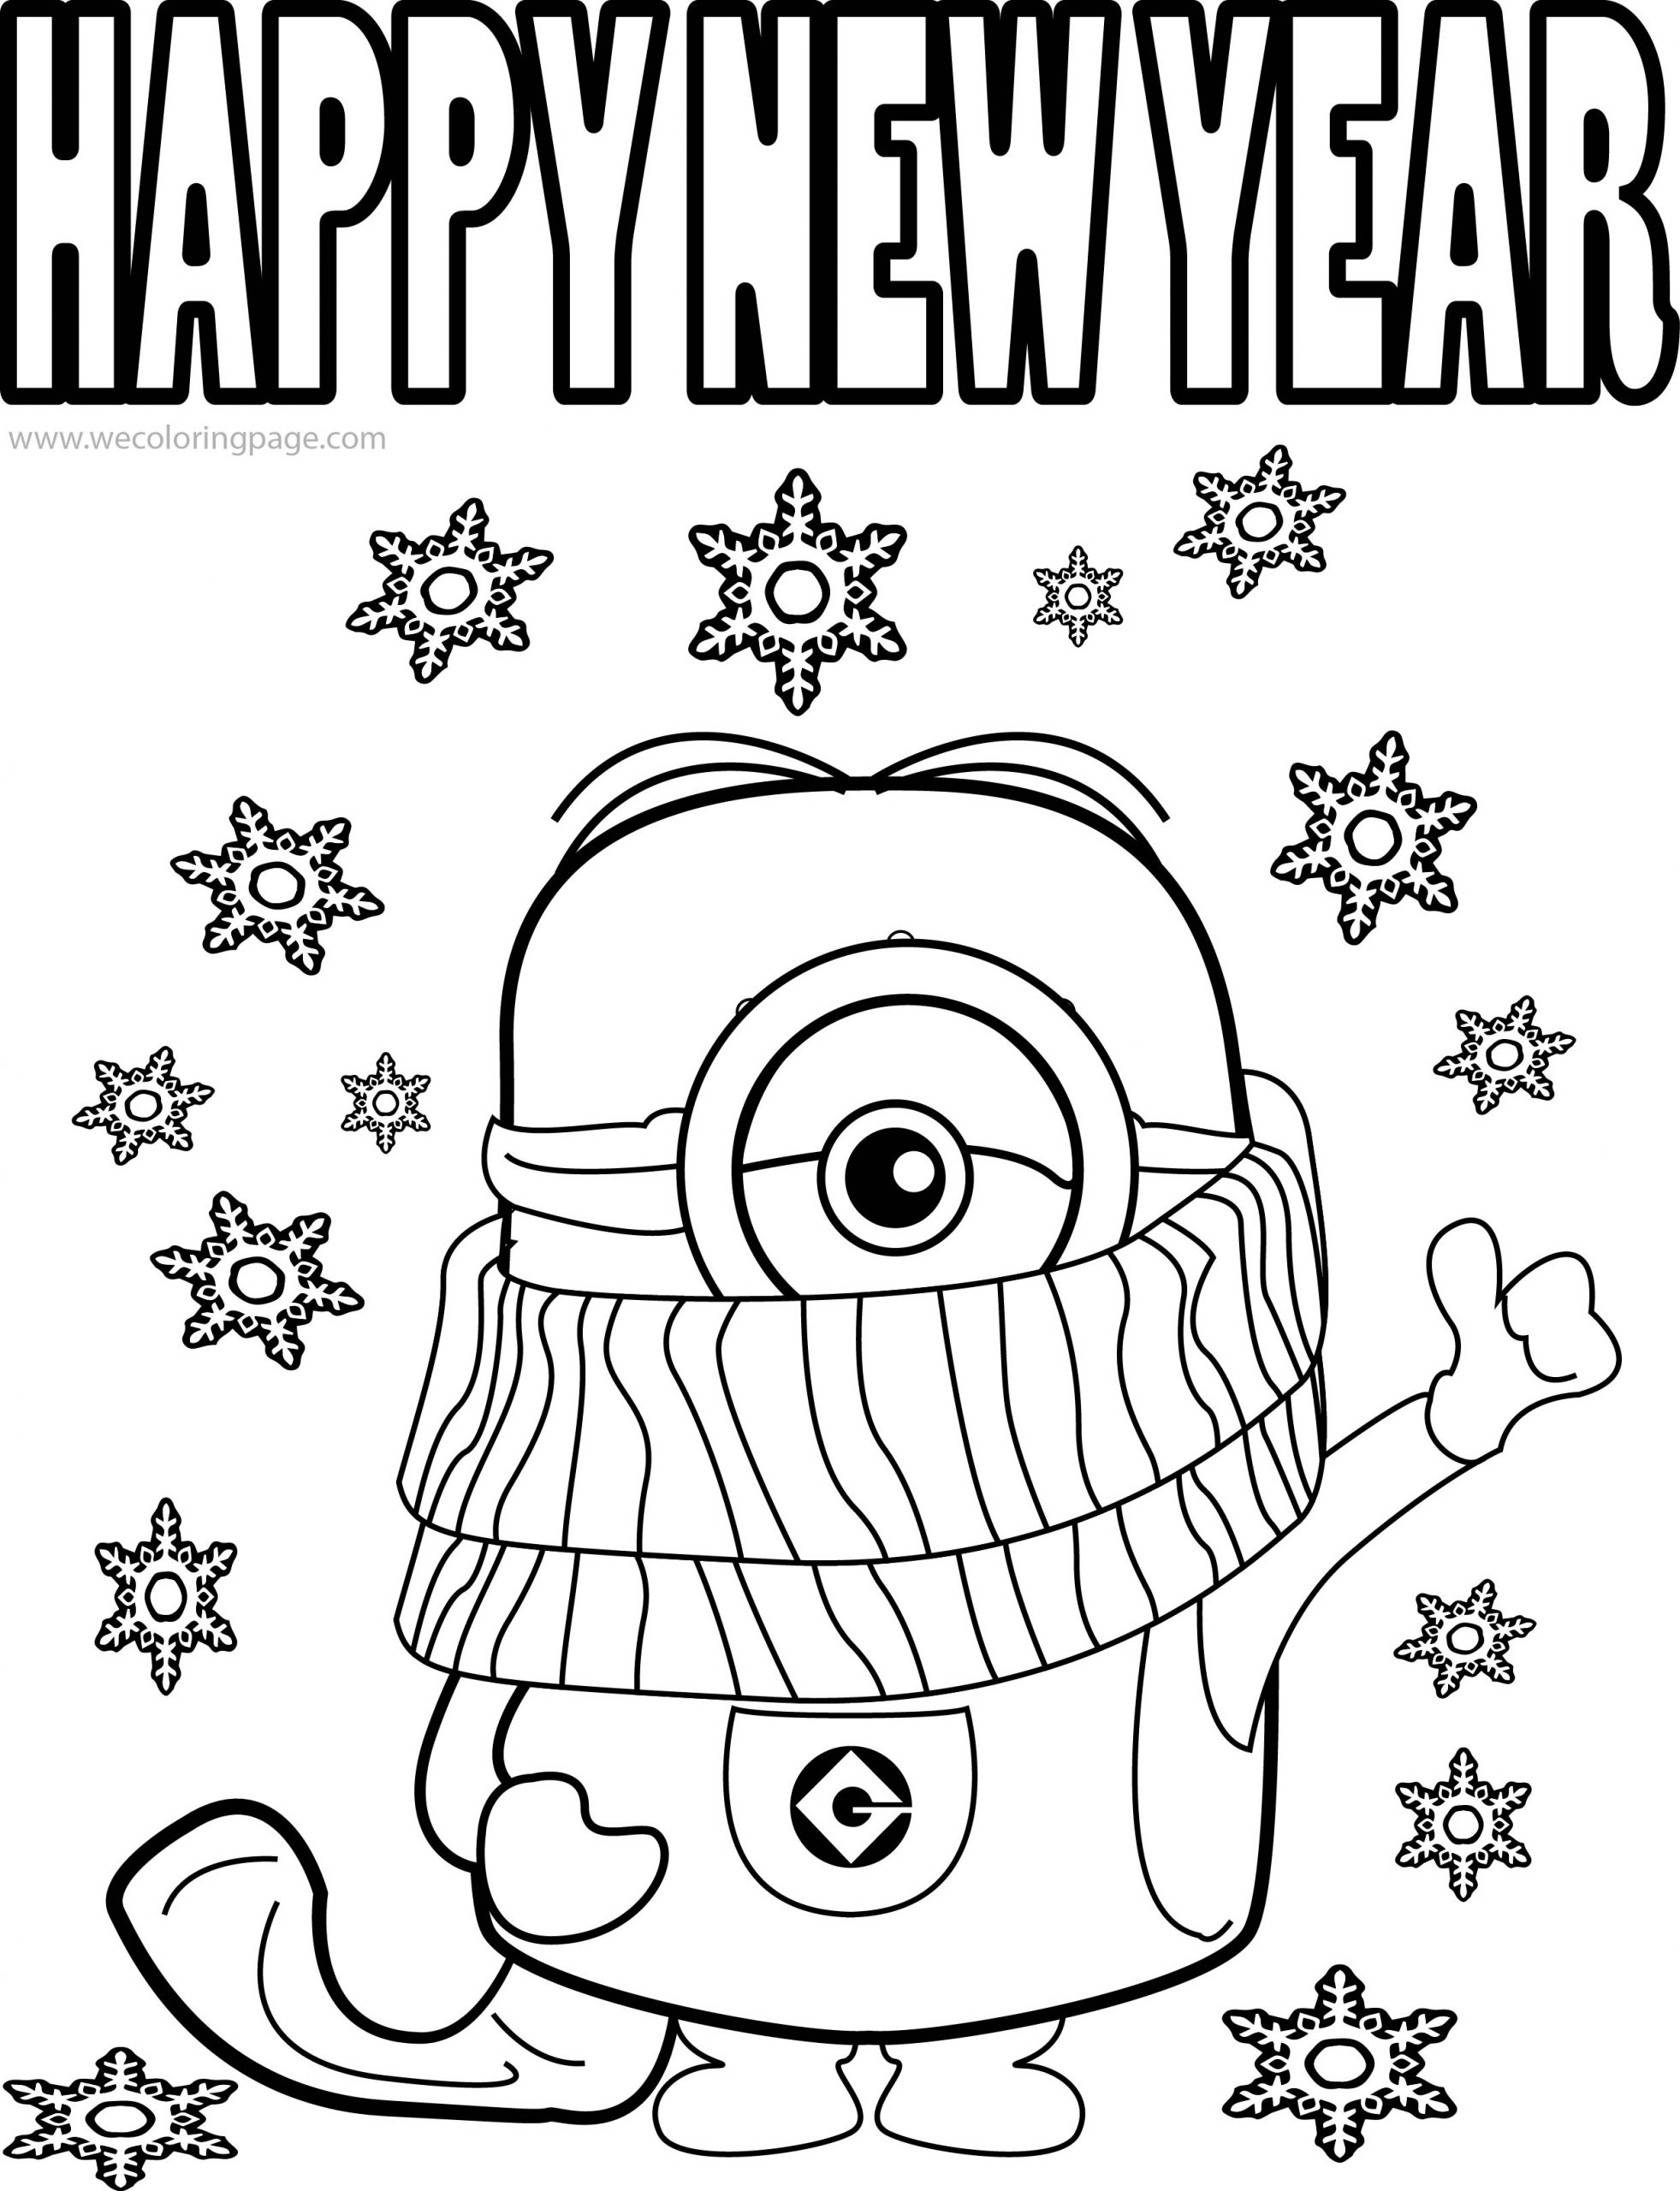 1546397167_new-year-coloring-pages-picture para colorir